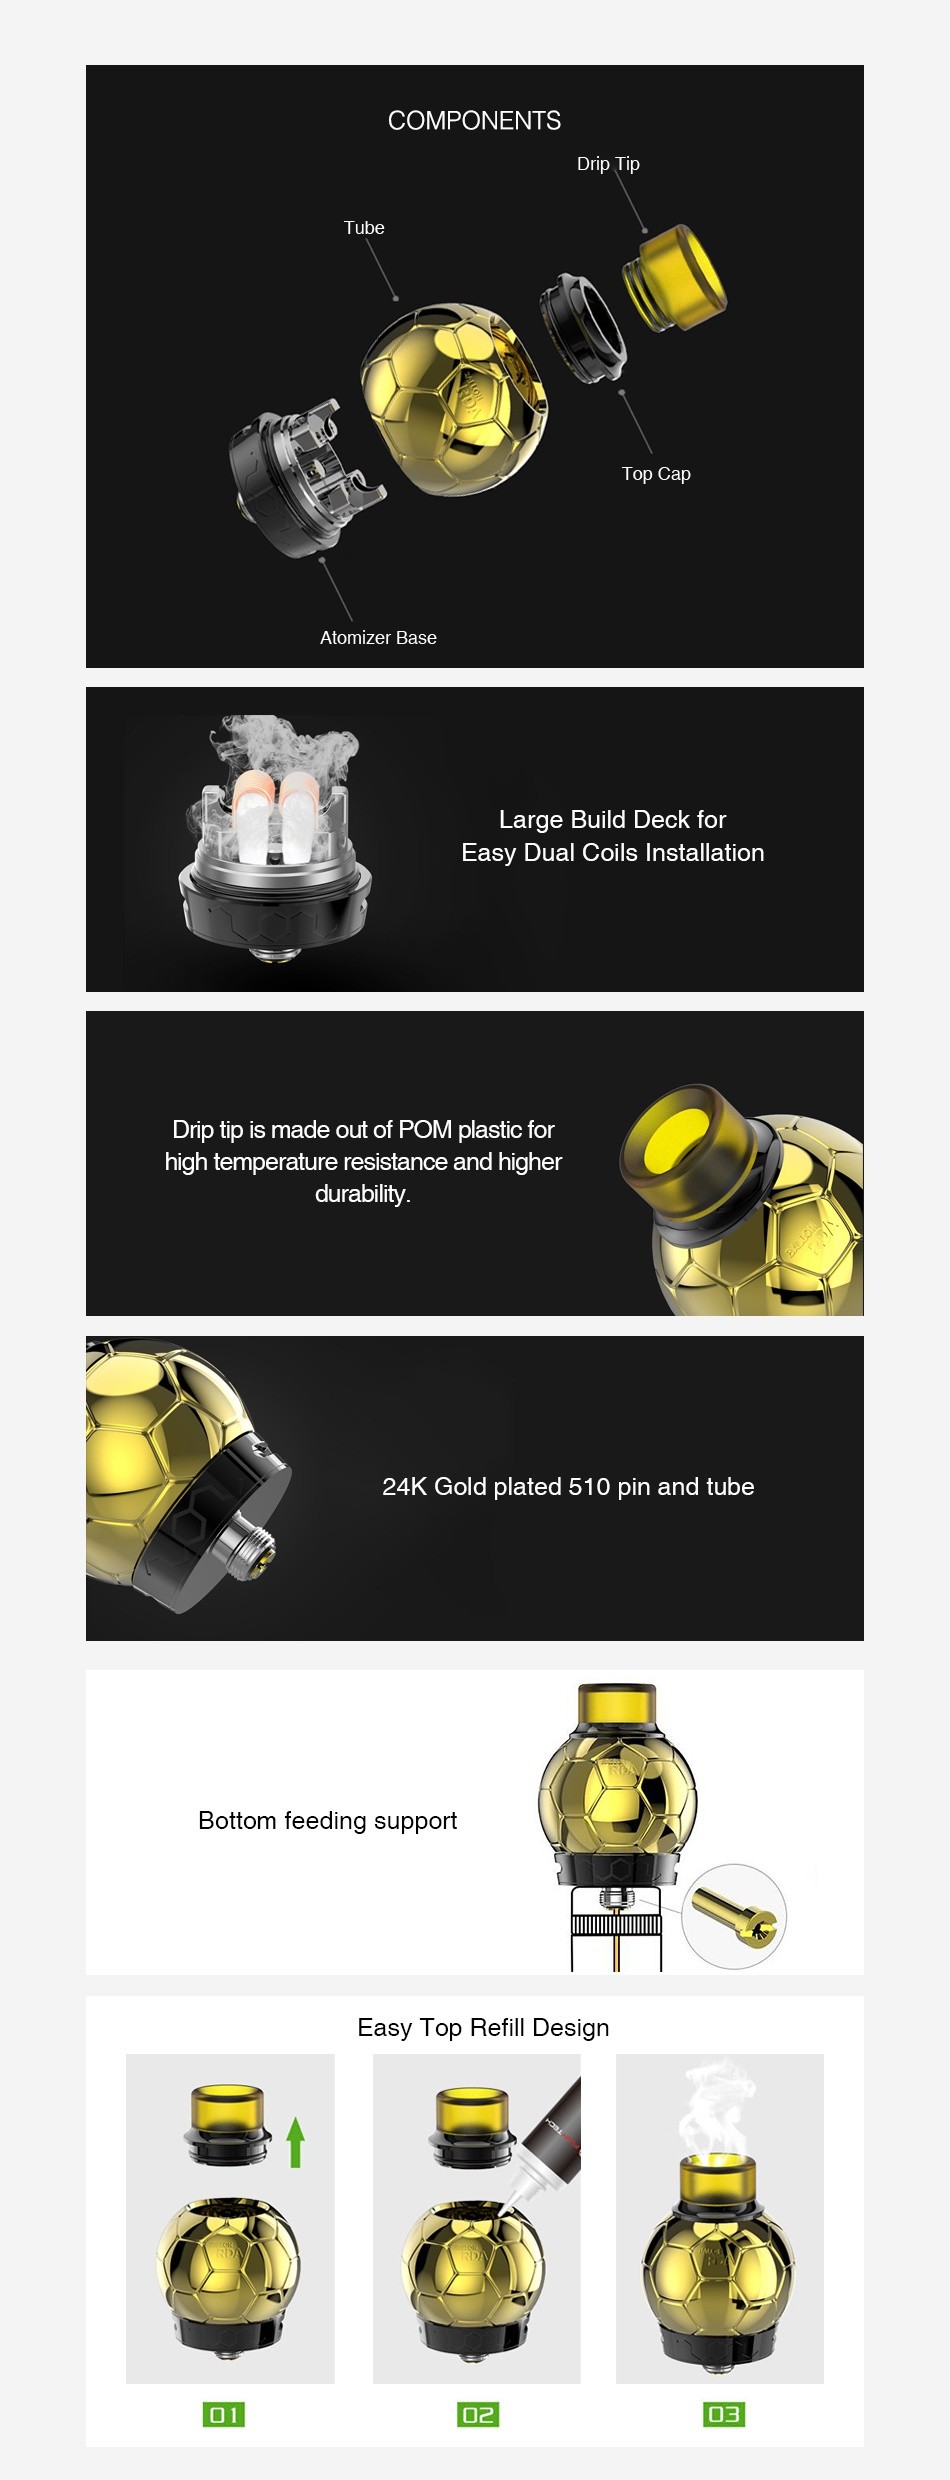 Fumytech Ballon RDA 3.5ml COMPONENTS T pCa Atomizer Base Large Build Deck for Easy Dual Coils Installation Drip tip is made out of POm plastic for high temperature resistance and higher K Gold plated 510 pin and tube Bottom feeding support m     Easy Top Refill Design 14